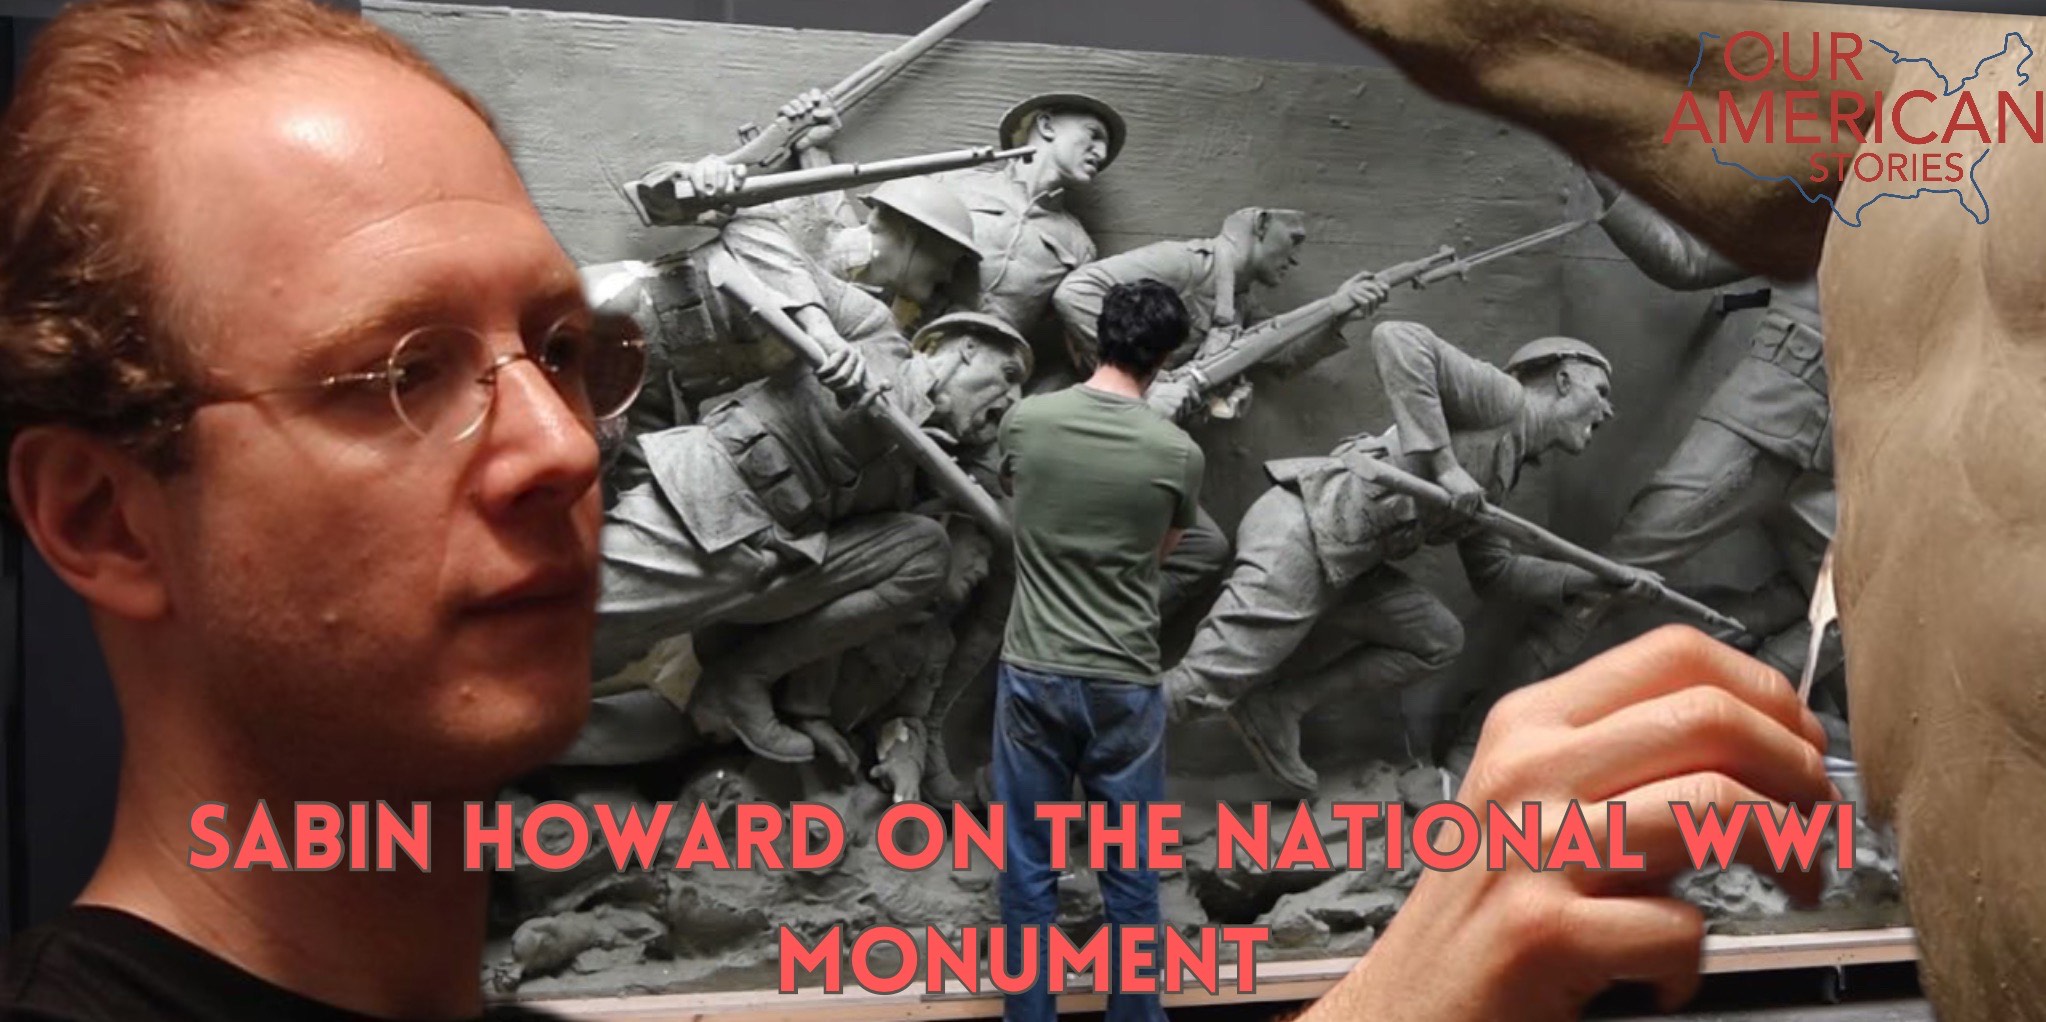 Sabin Howard on the National WWI Monument